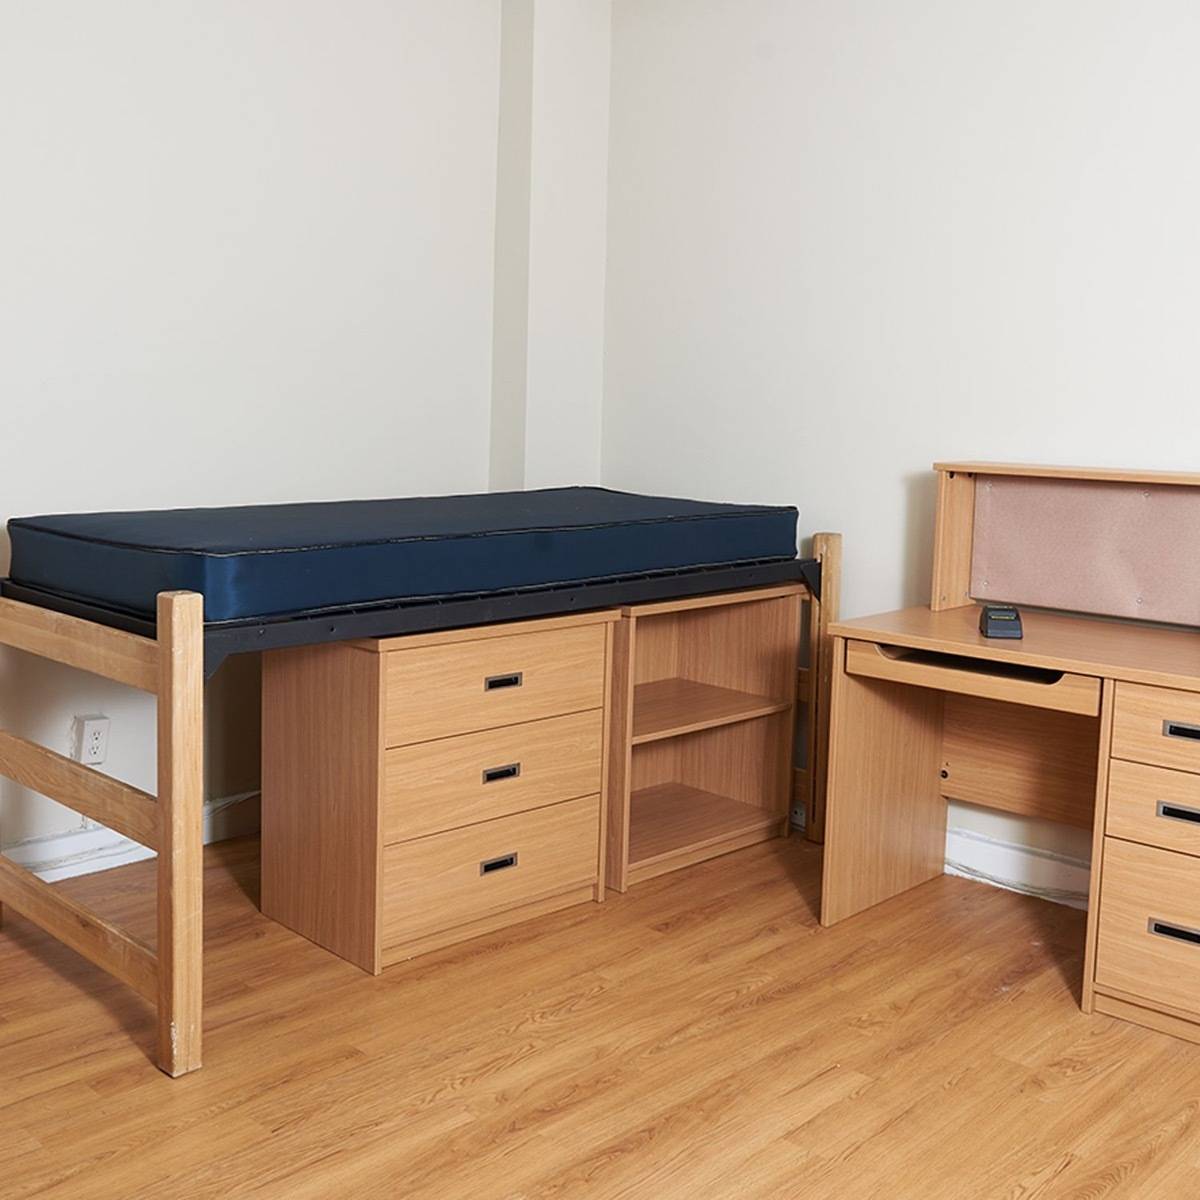 Undecorated dorm room containing a single bed with under-bed storage and a matching desk.